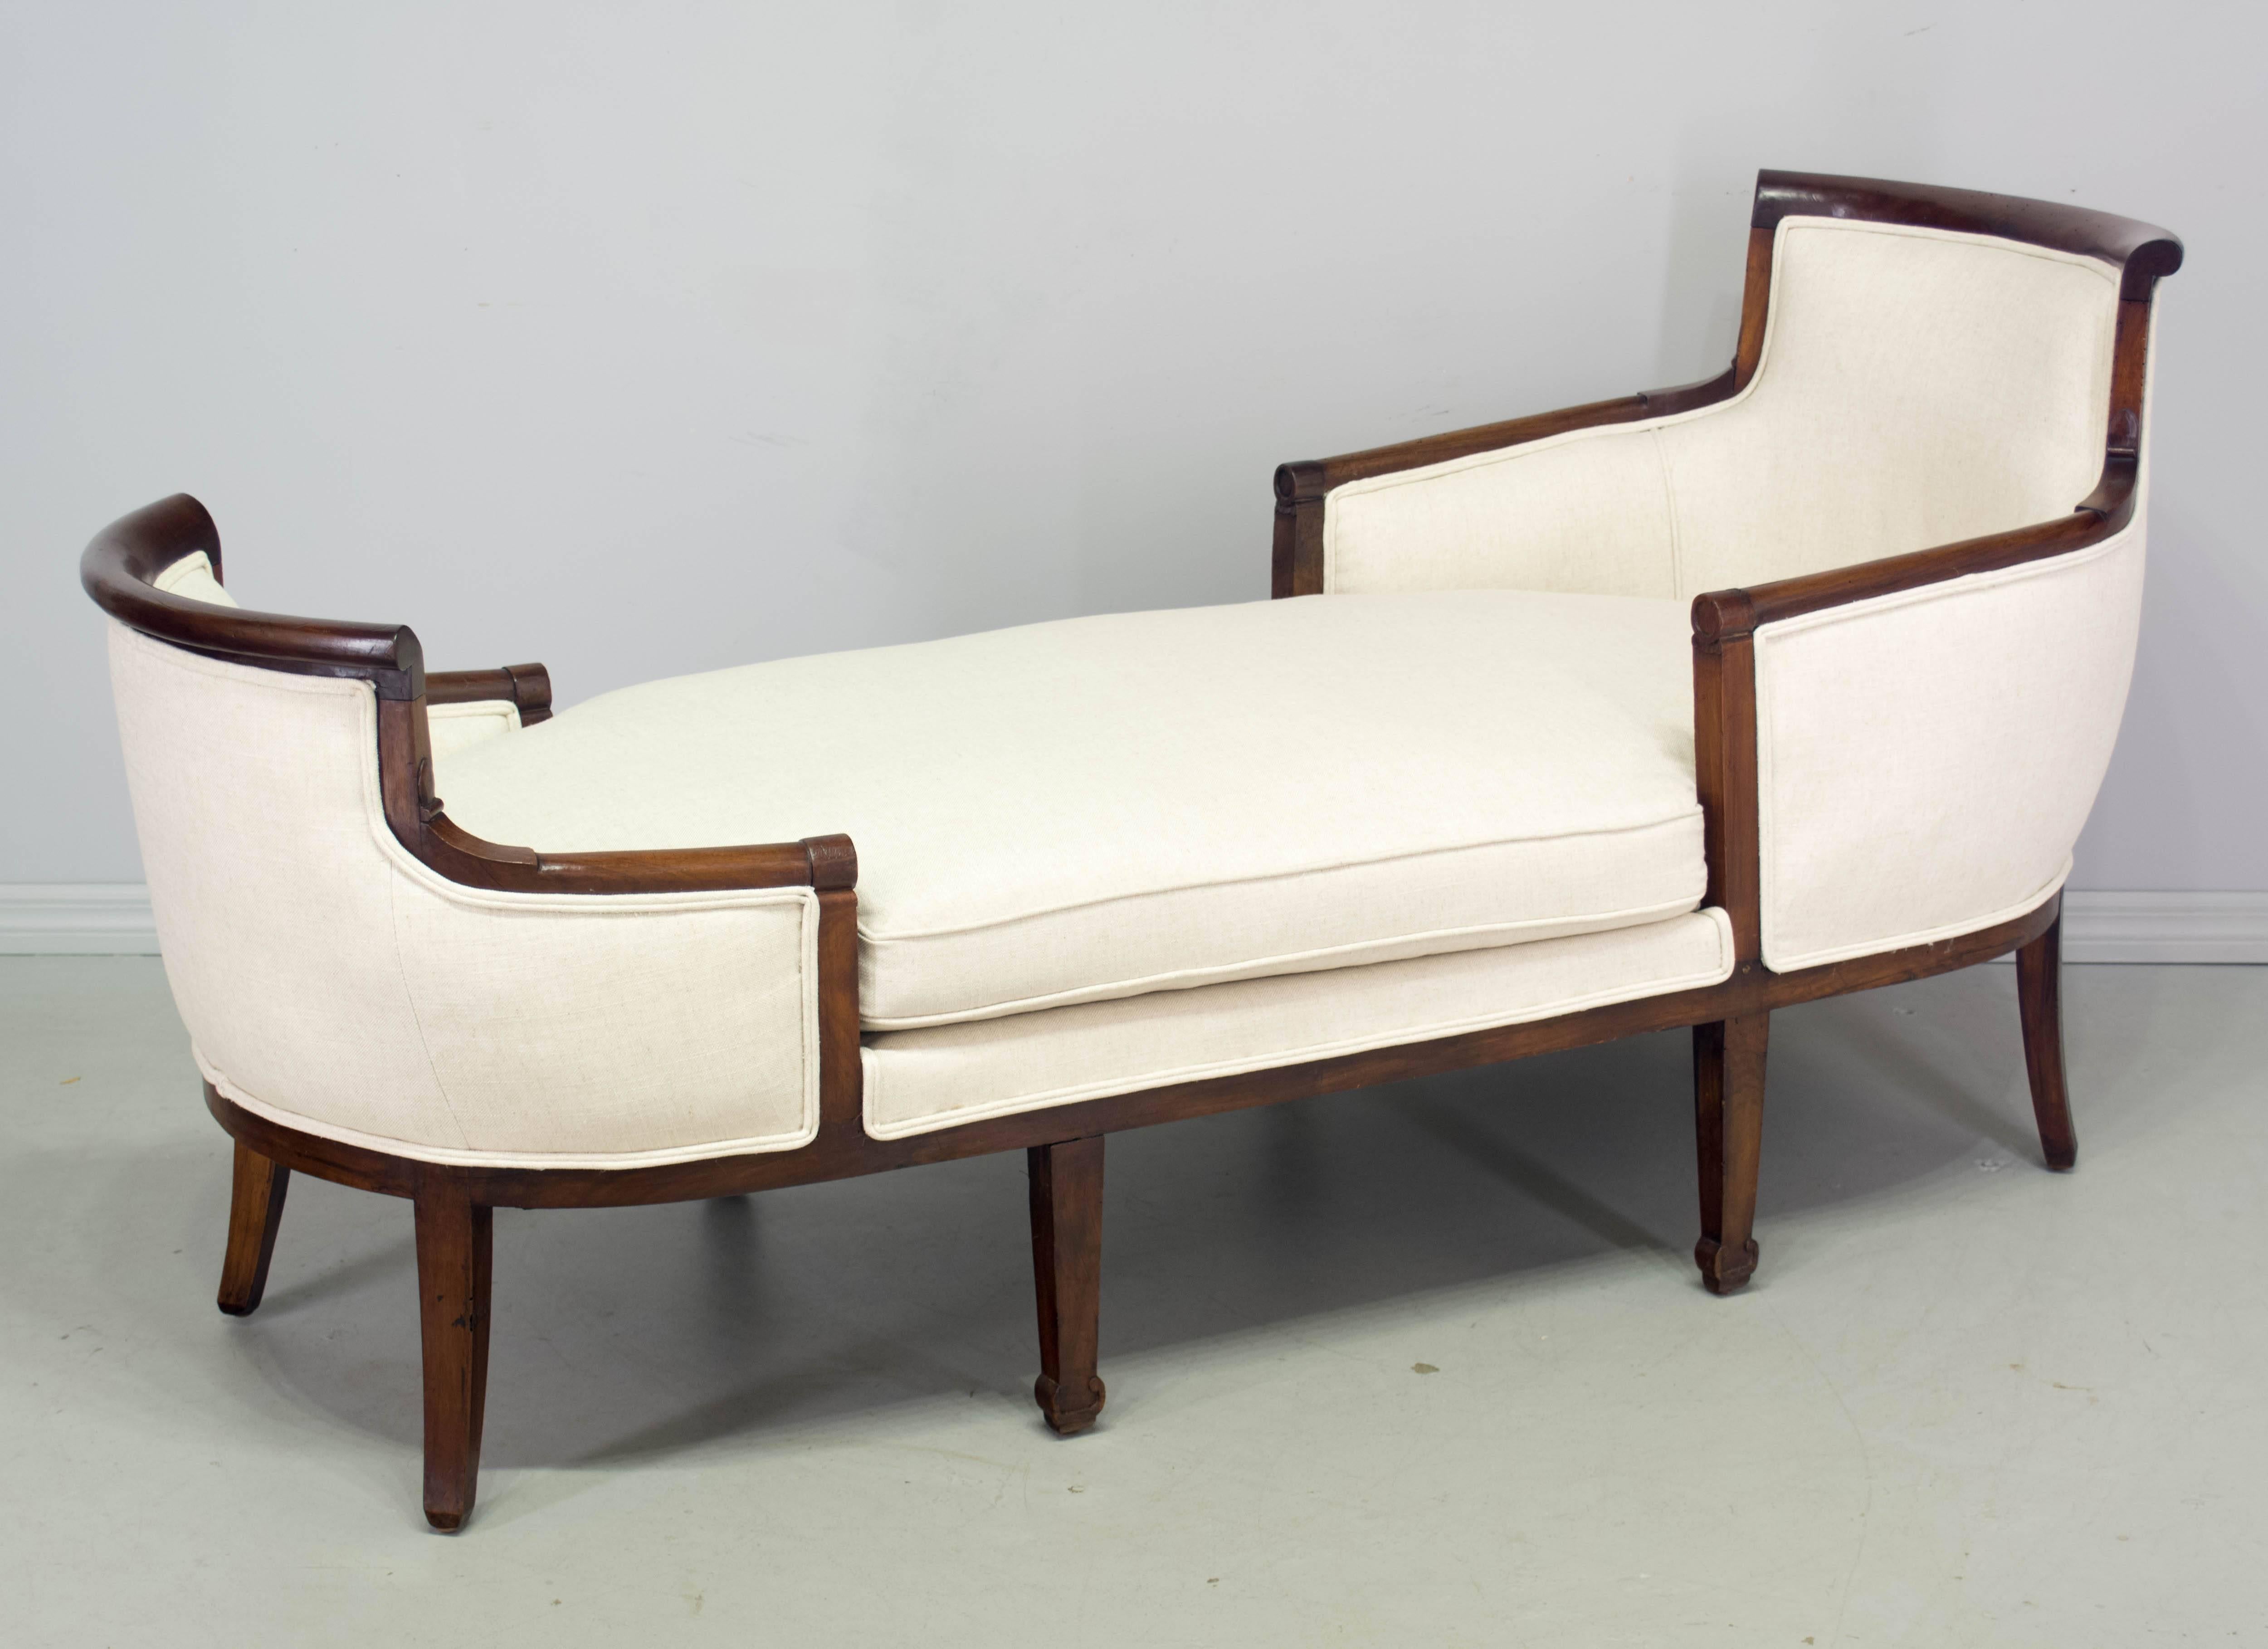 Walnut 19th Century French Empire Chaise